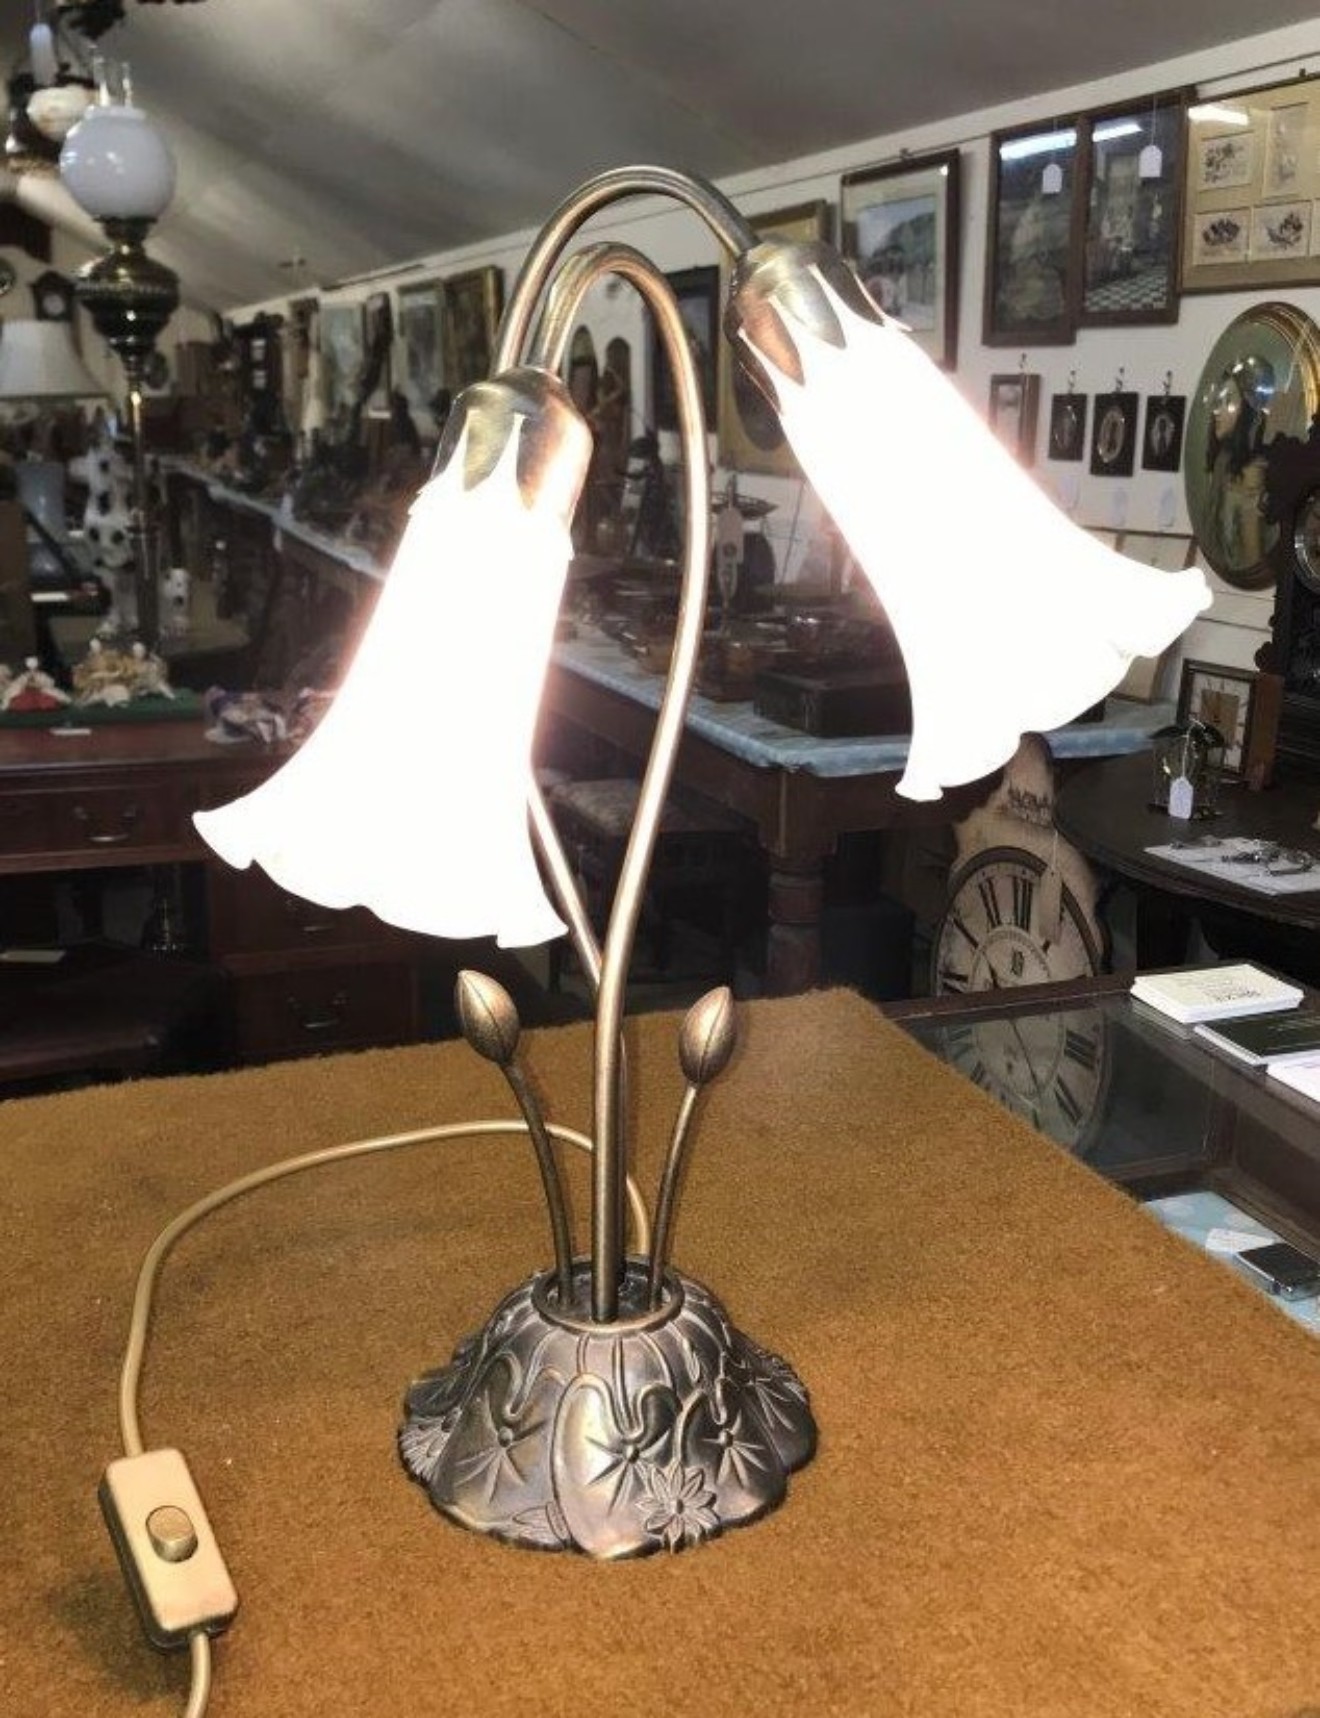 Vintage Twin Globe Lily Table Lamp Bronzed Effect Finish with Mottled Glass Shades